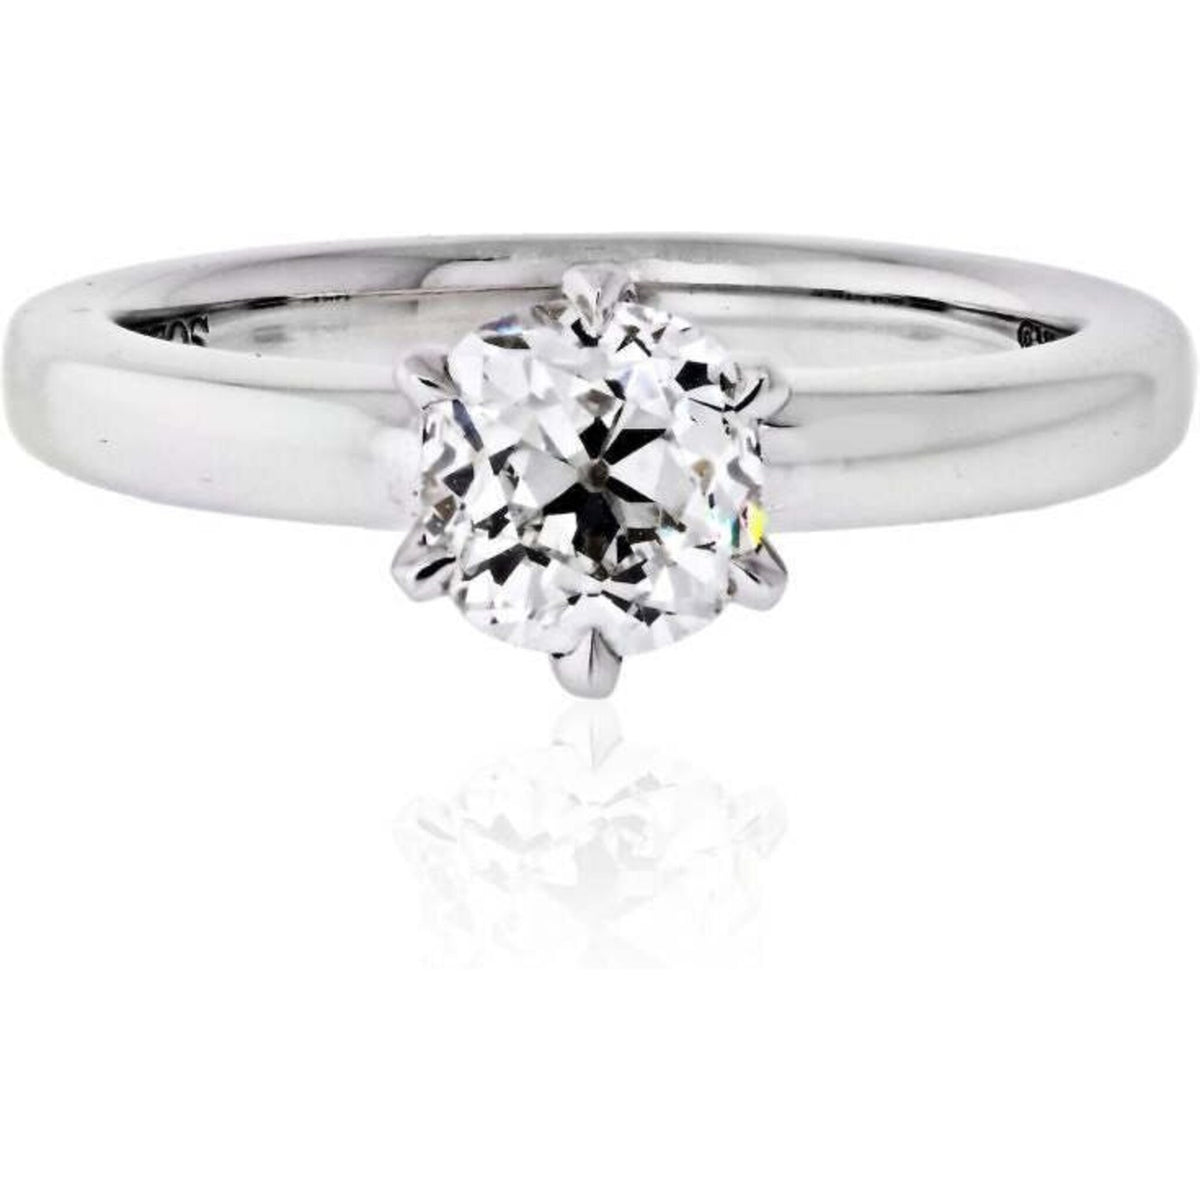 1.04 Carat Old Mine Cut Diamond G/VS2 GIA Solitaire Engagement Ring